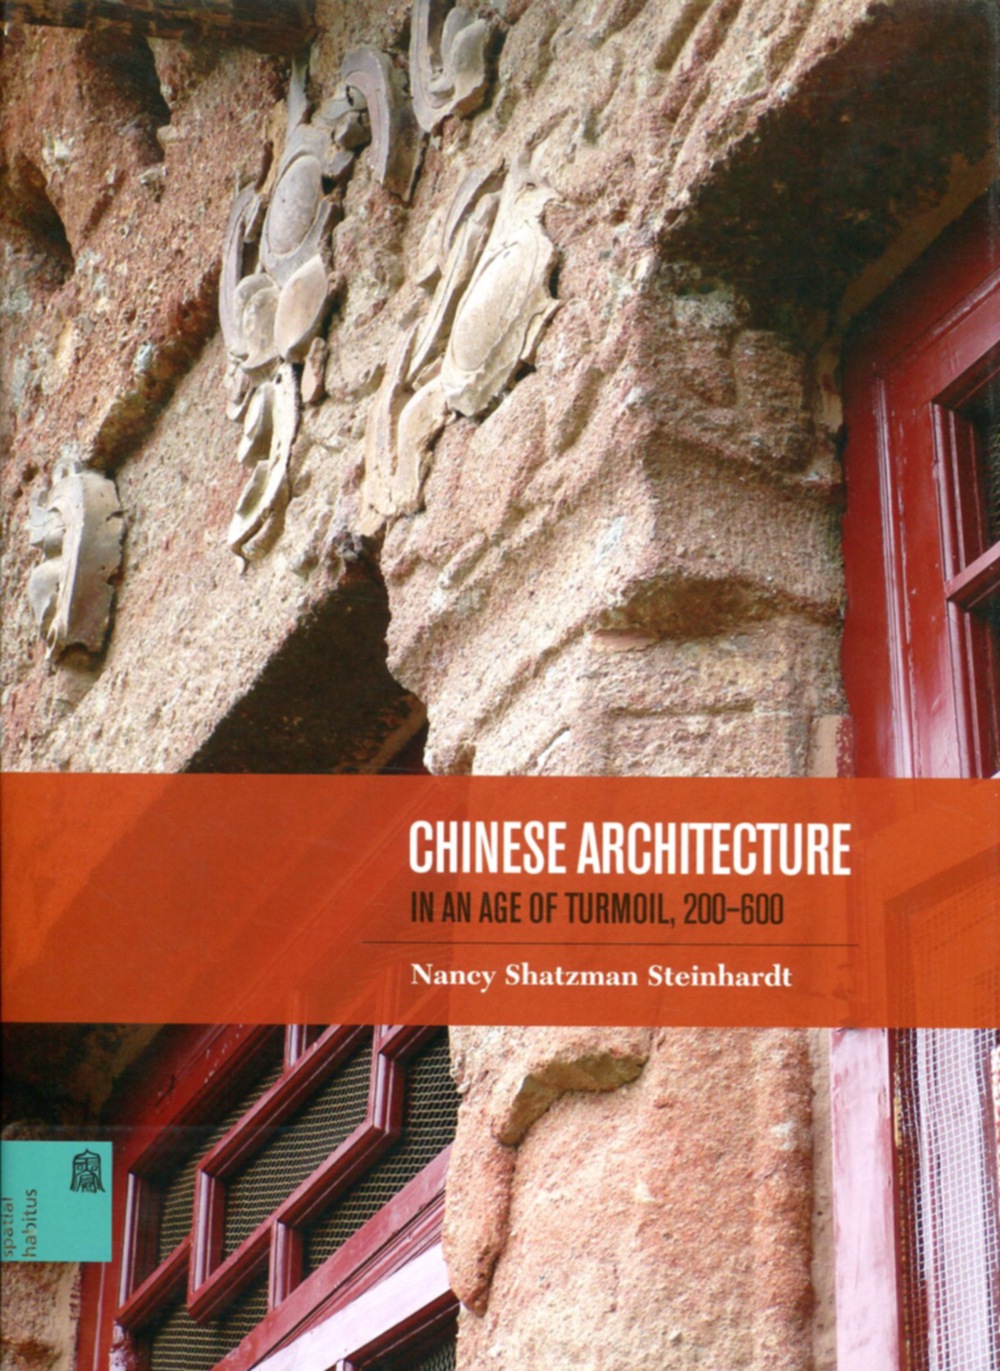 Chinese Architecture in an Age of Turmoil, 200-600